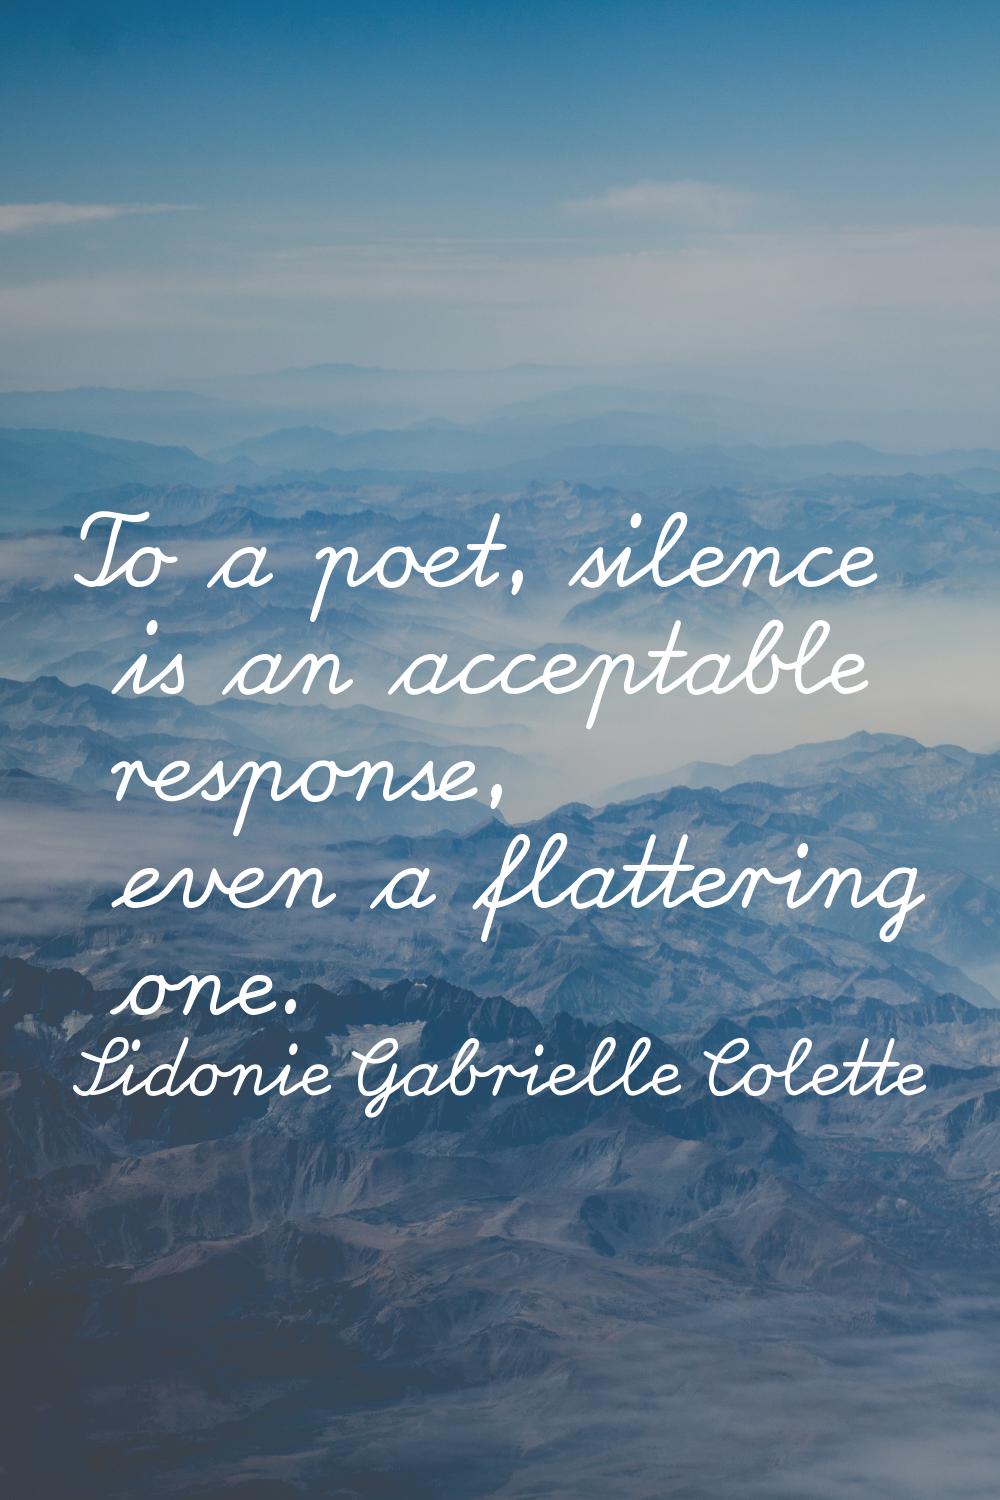 To a poet, silence is an acceptable response, even a flattering one.